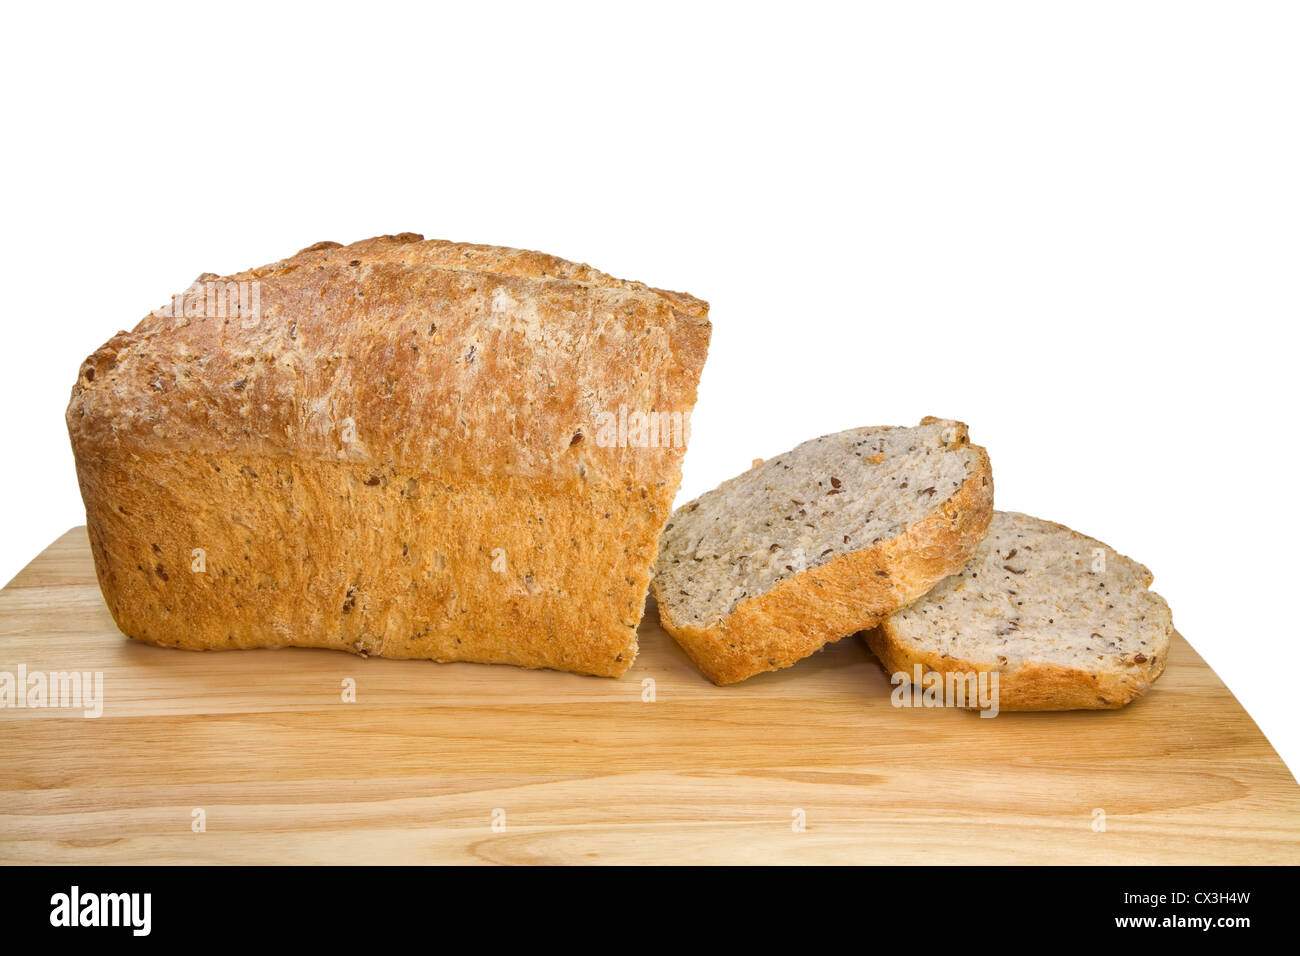 Homemade multigrain bread sliced on a wooden cutting board. Stock Photo